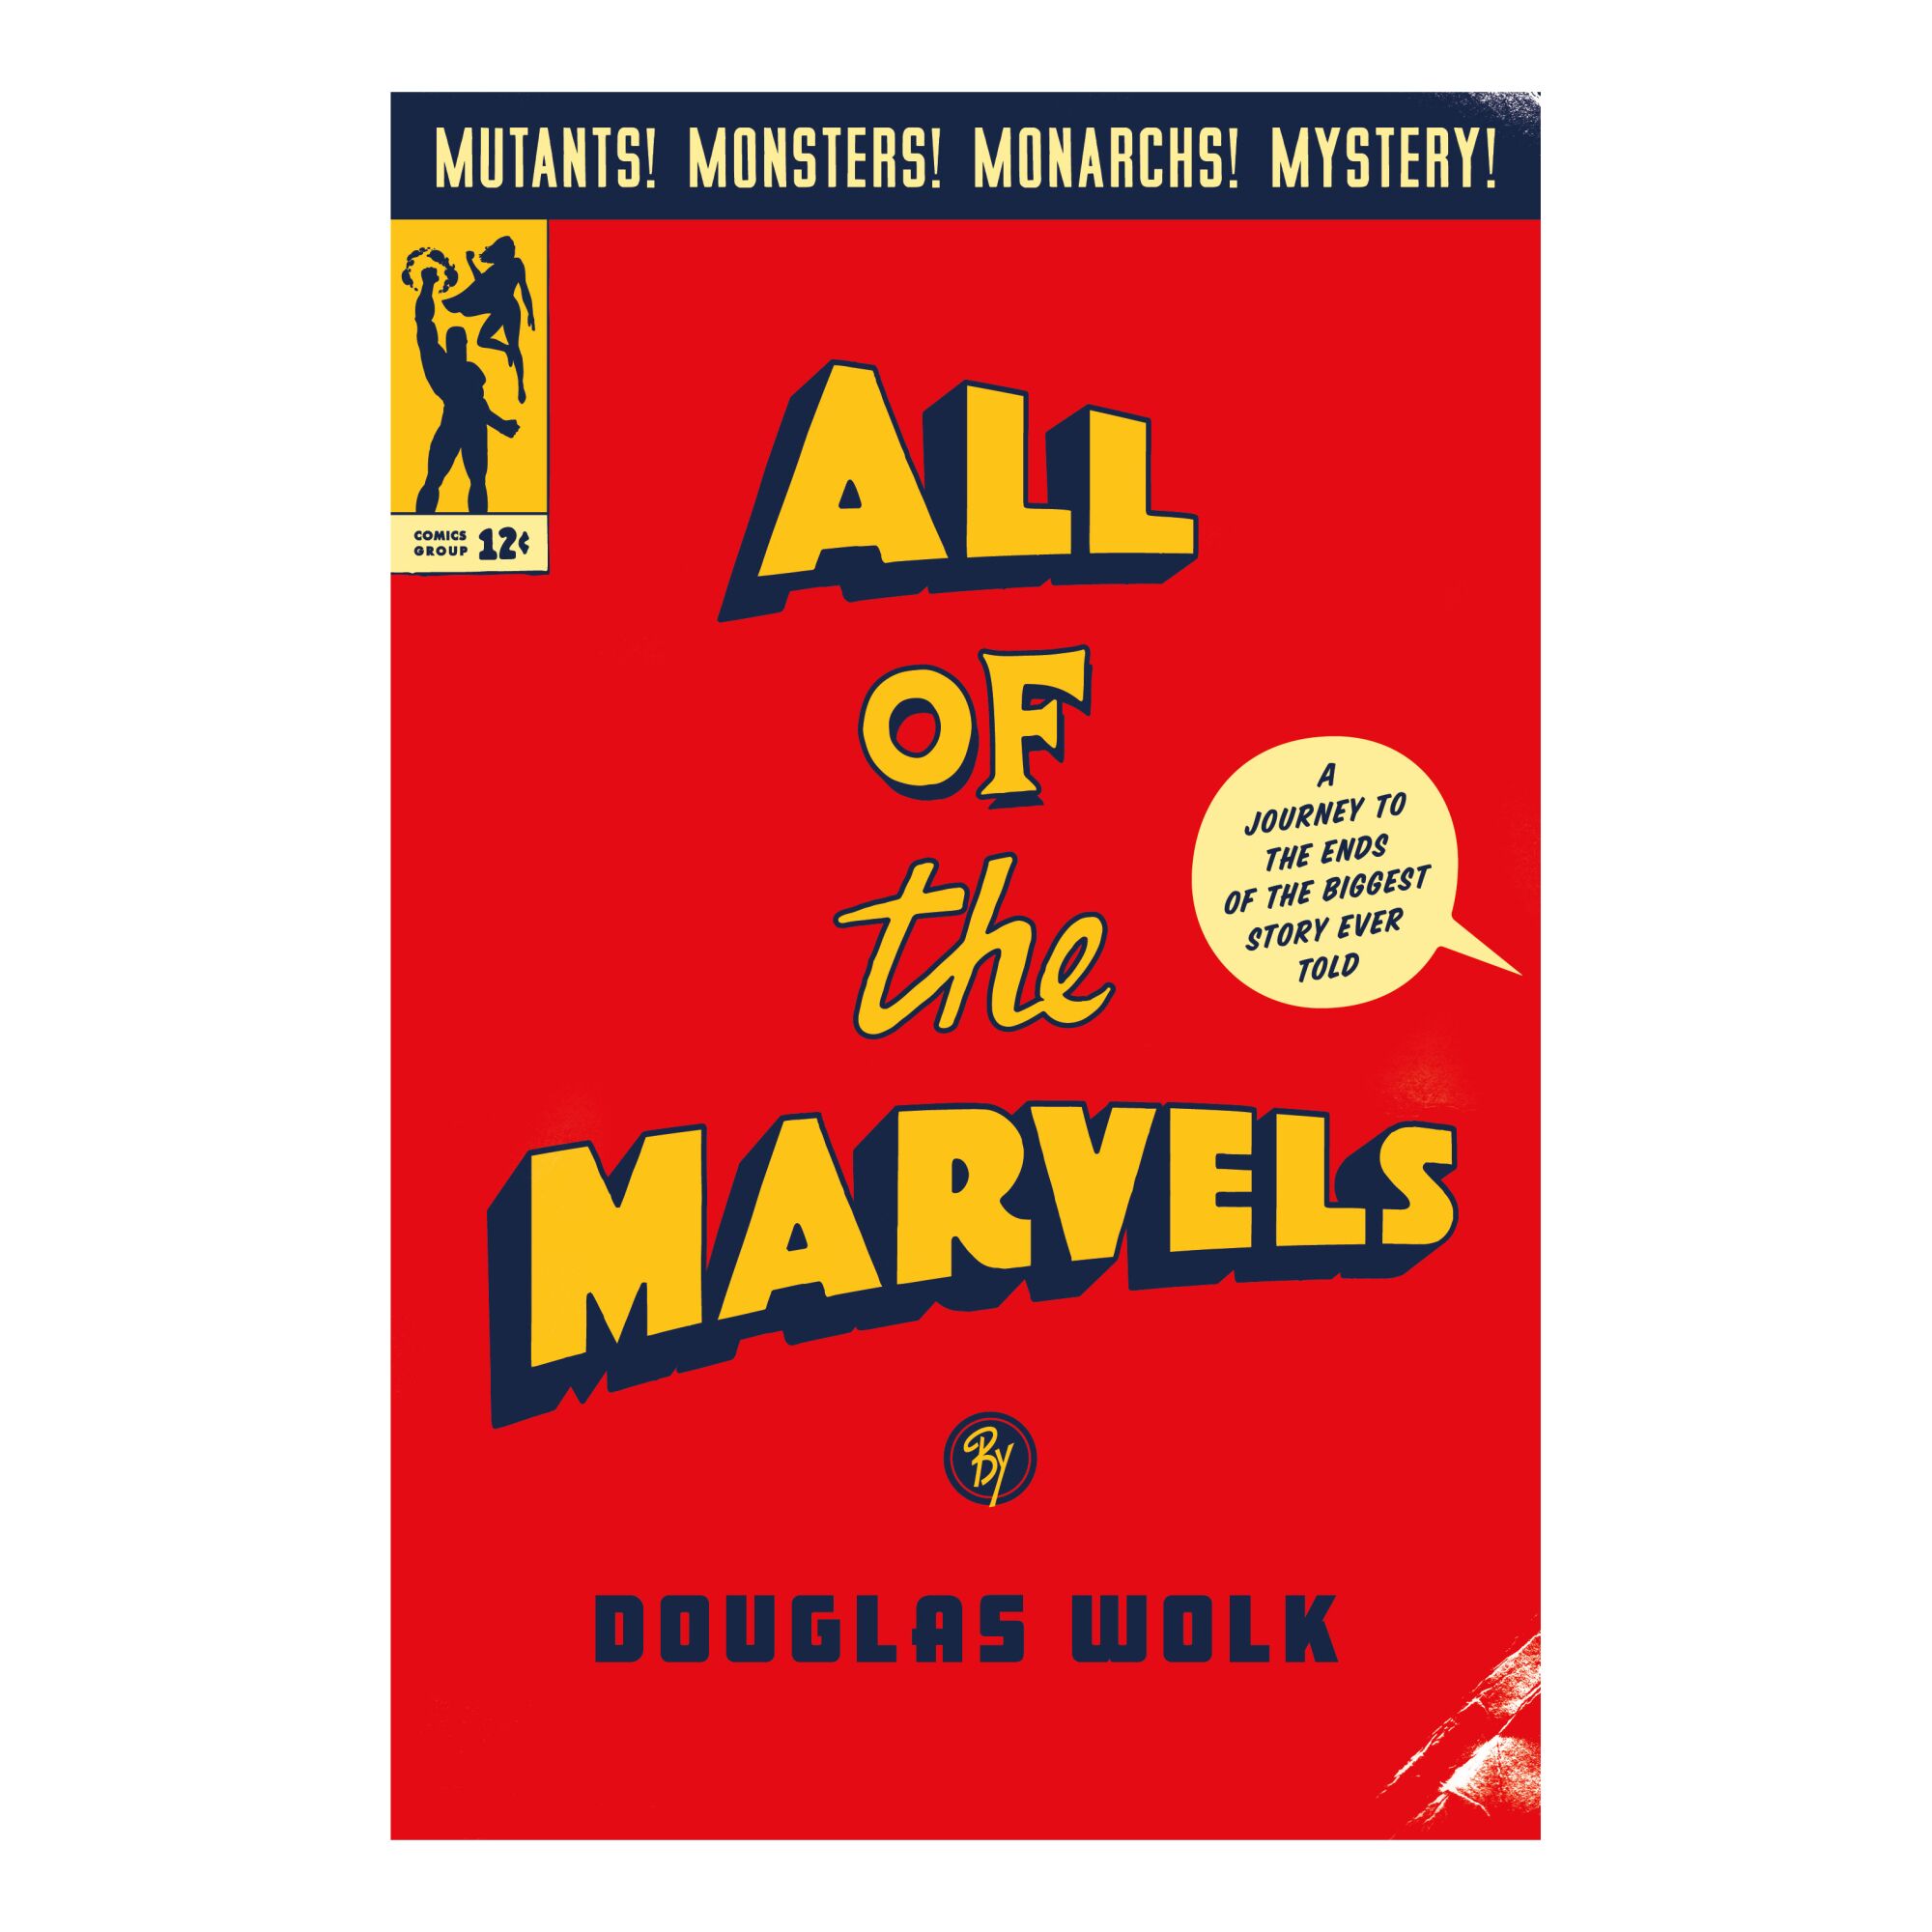 'All of the Marvels' cover